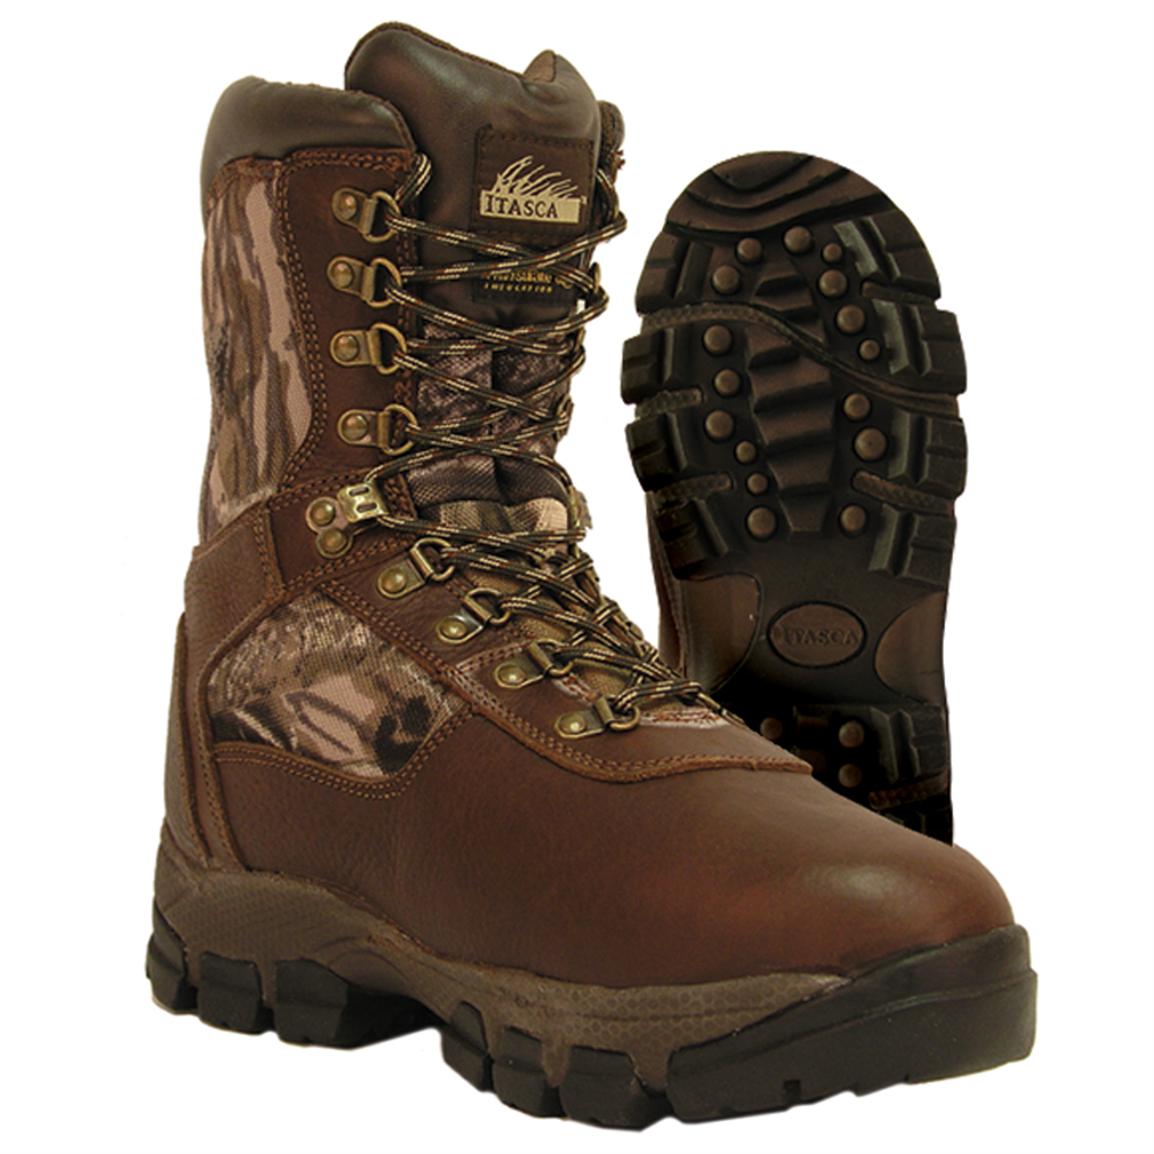 Men's Itasca™ 2,000 grams Thinsulate™ Ultra Insulation Cheyenne Boots ...